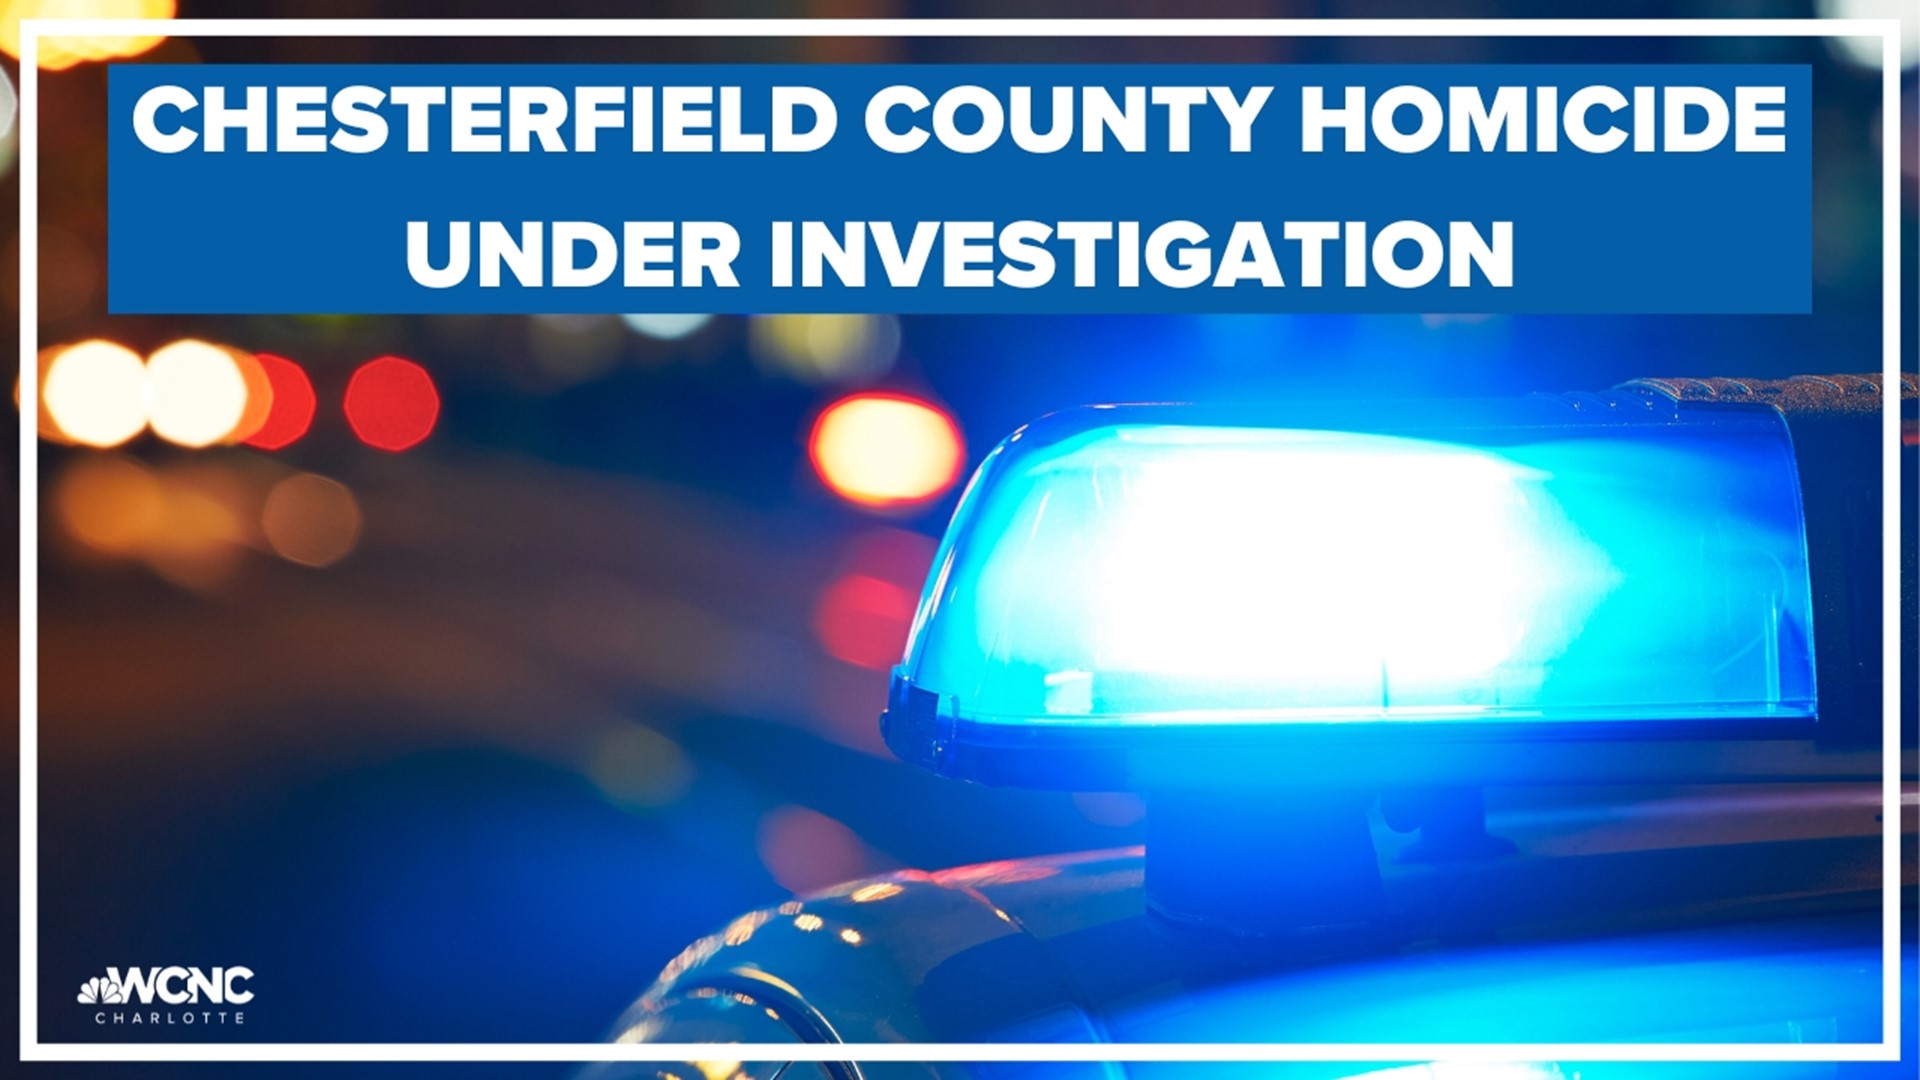 Chesterfield County fatal shooting under investigation